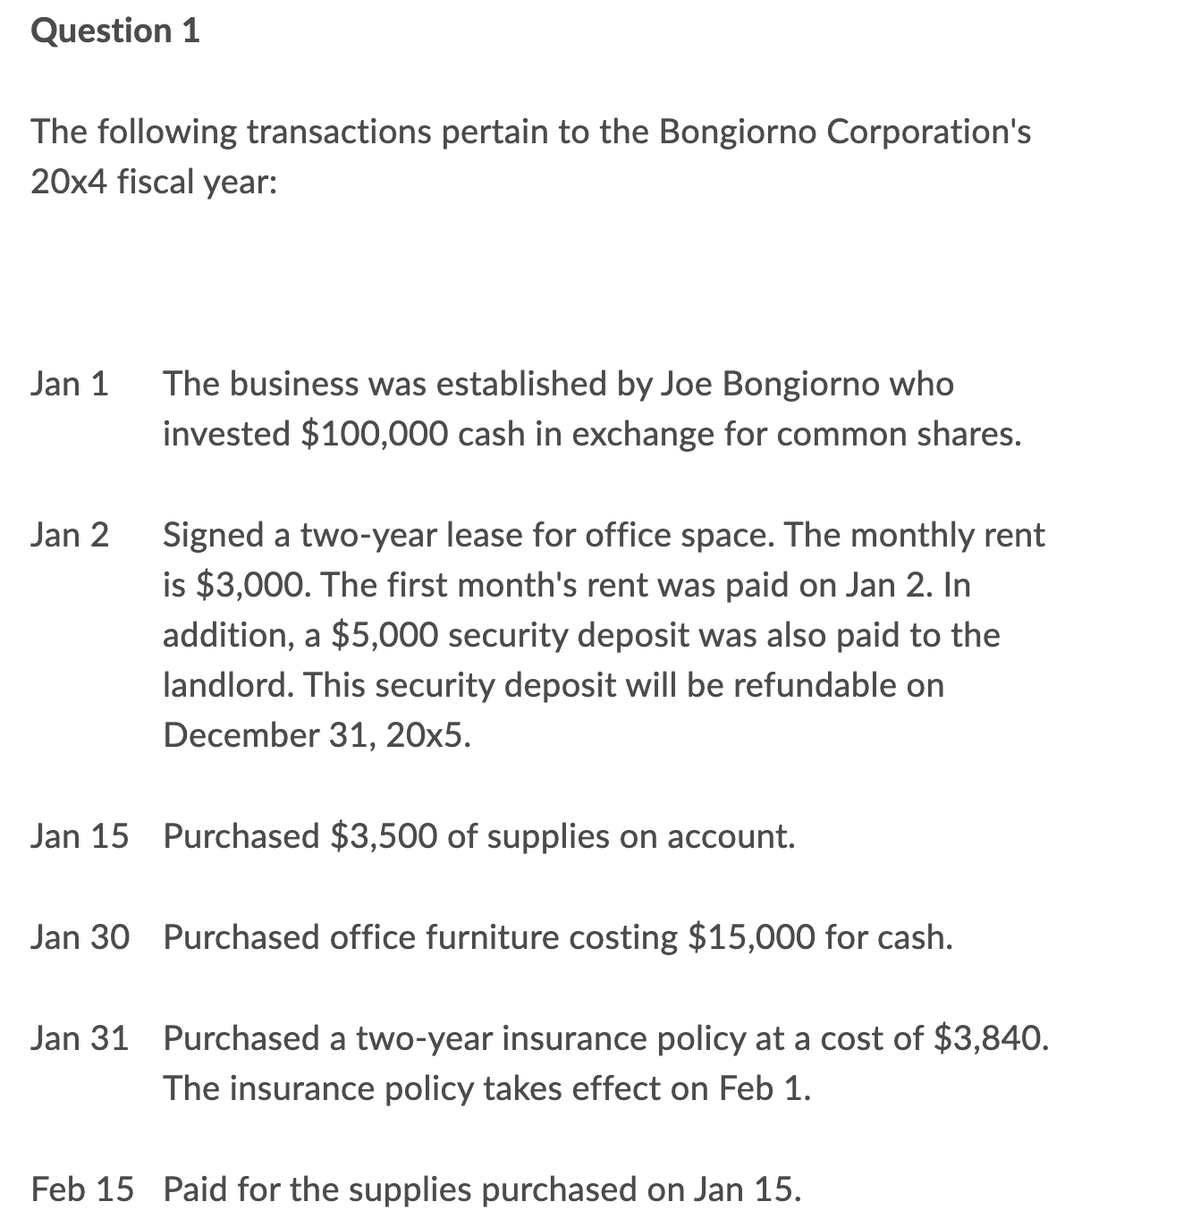 Question 1
The following transactions pertain to the Bongiorno Corporation's
20x4 fiscal year:
Jan 1
The business was established by Joe Bongiorno who
invested $100,000 cash in exchange for common shares.
Signed a two-year lease for office space. The monthly rent
is $3,000. The first month's rent was paid on Jan 2. In
addition, a $5,000 security deposit was also paid to the
Jan 2
landlord. This security deposit will be refundable on
December 31, 20x5.
Jan 15 Purchased $3,500 of supplies on account.
Jan 30 Purchased office furniture costing $15,000 for cash.
Jan 31 Purchased a two-year insurance policy at a cost of $3,840.
The insurance policy takes effect on Feb 1.
Feb 15 Paid for the supplies purchased on Jan 15.
